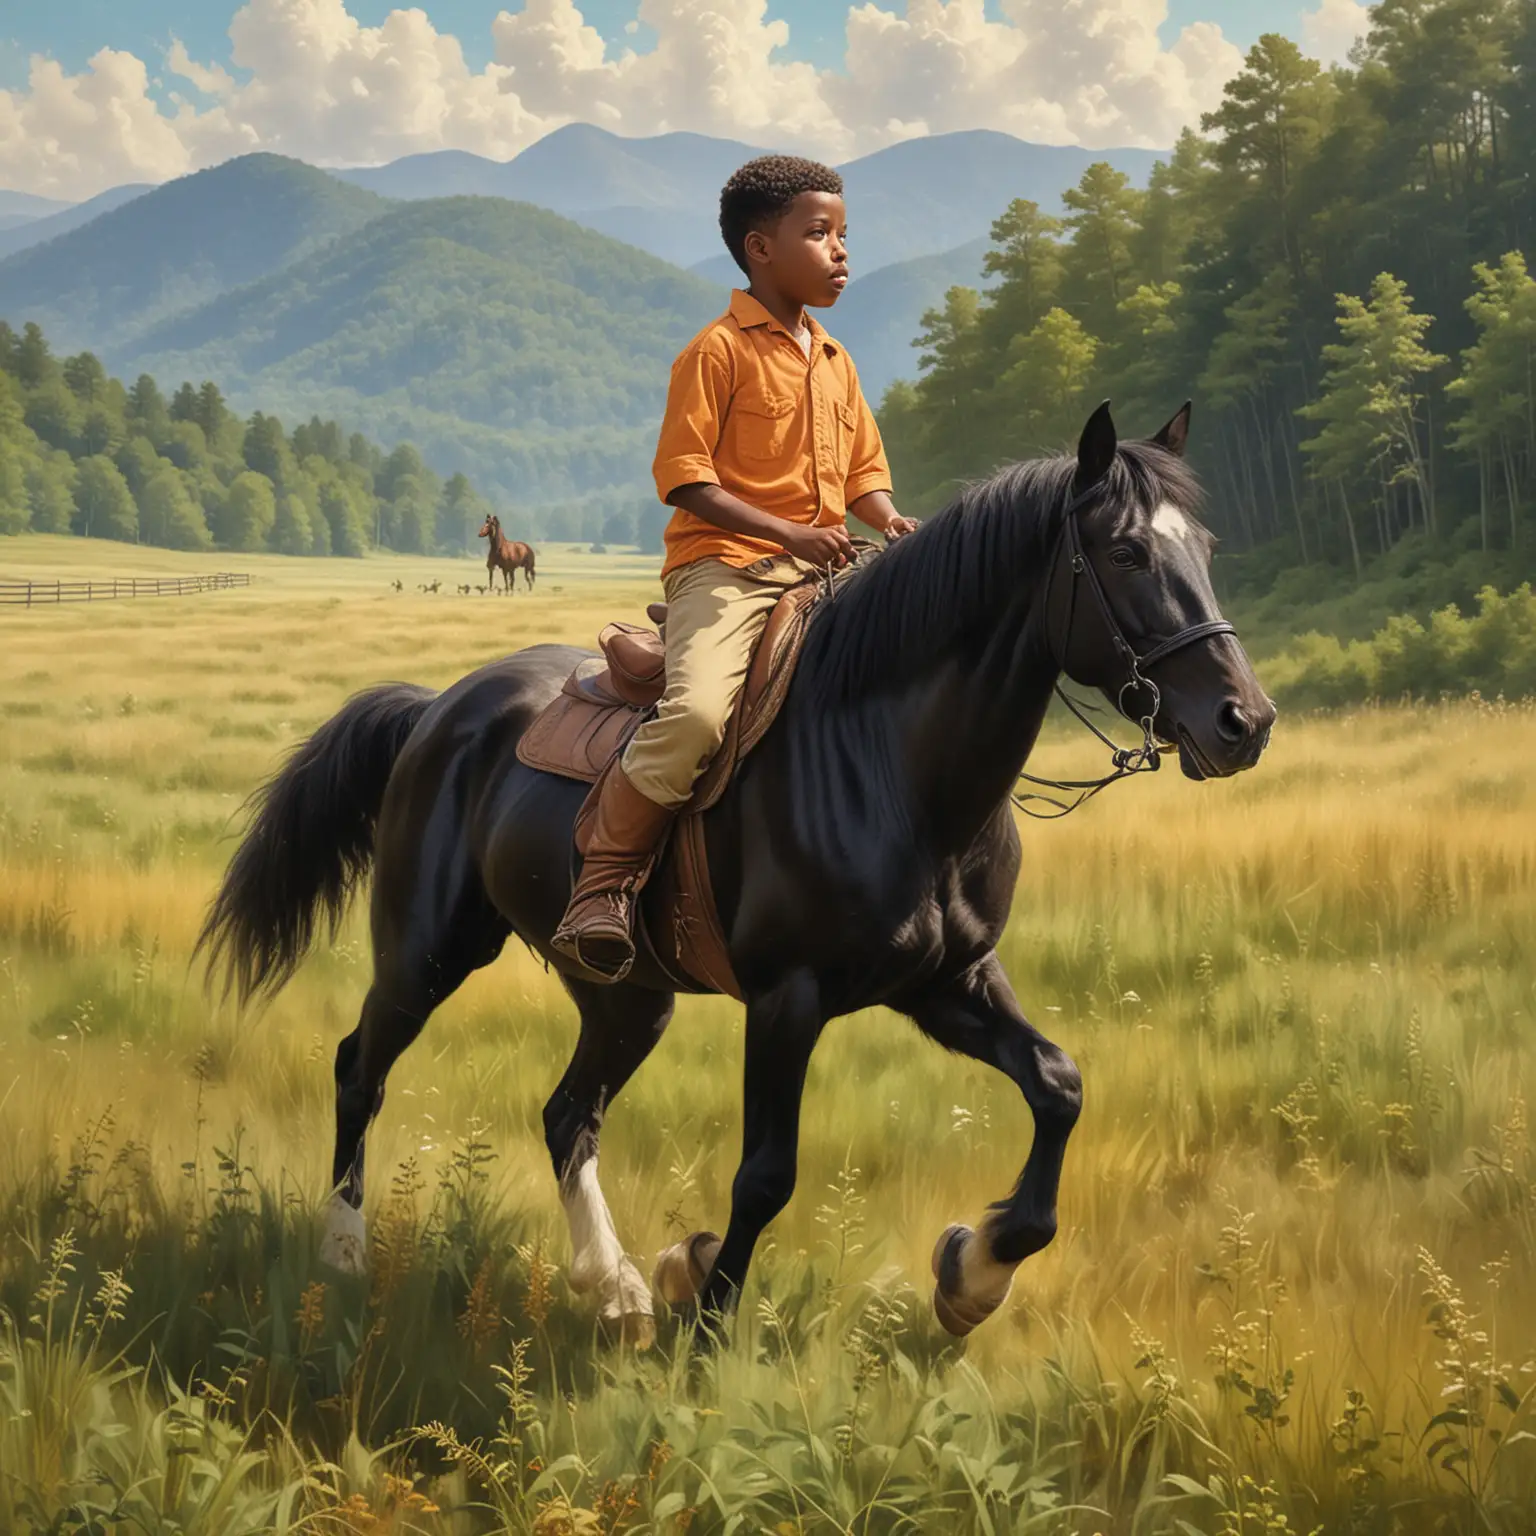 Young AfricanAmerican Boy Riding Black Stallion with Golden Collie in 1960s North Carolina Meadow